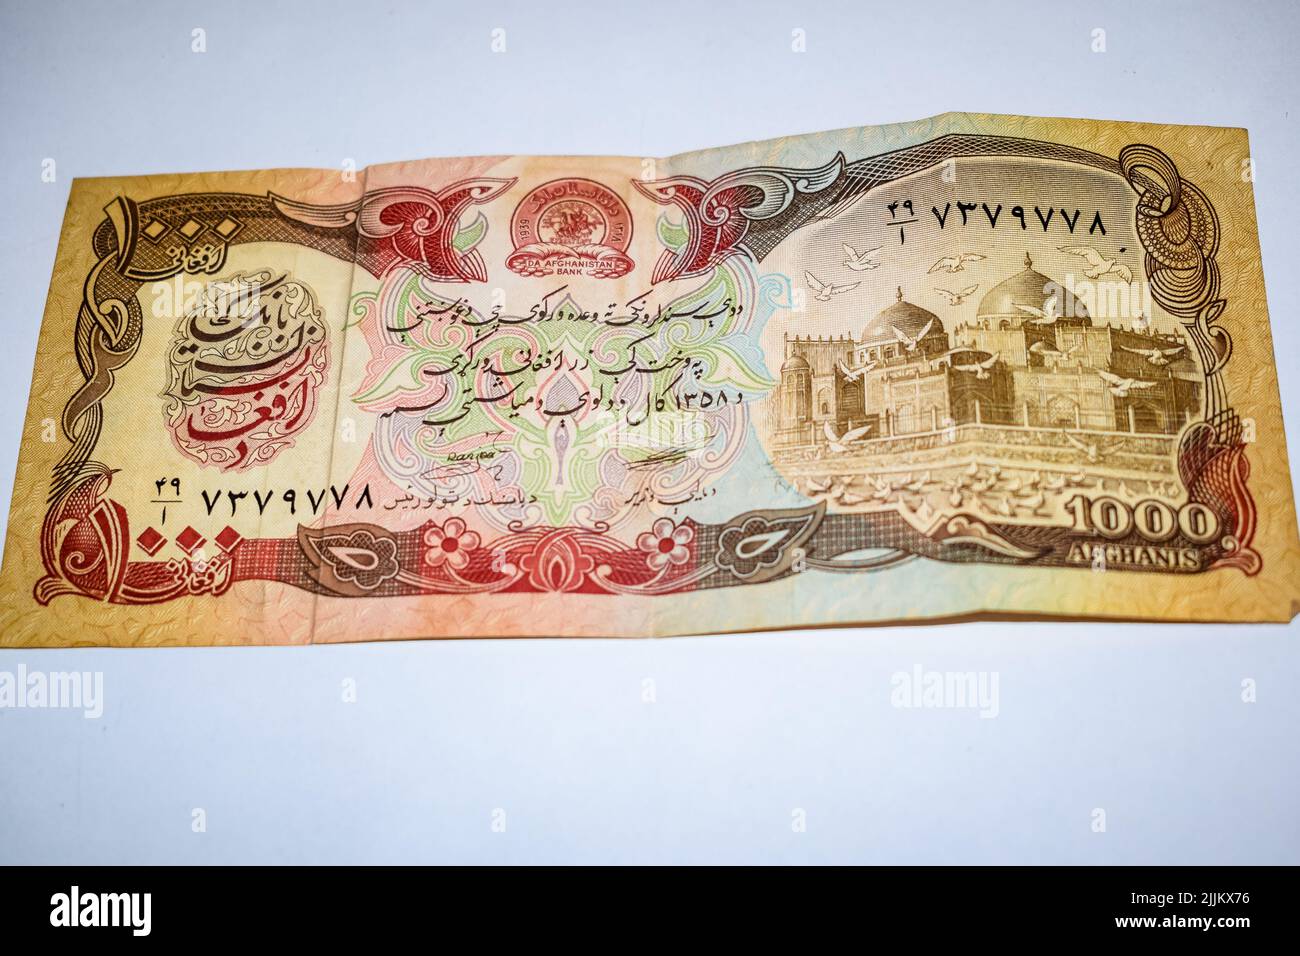 Rare Old One thousand Afgans Foreign Currency Note, Afganistan Old Foreign Currency Note, Very old currency with white background Stock Photo